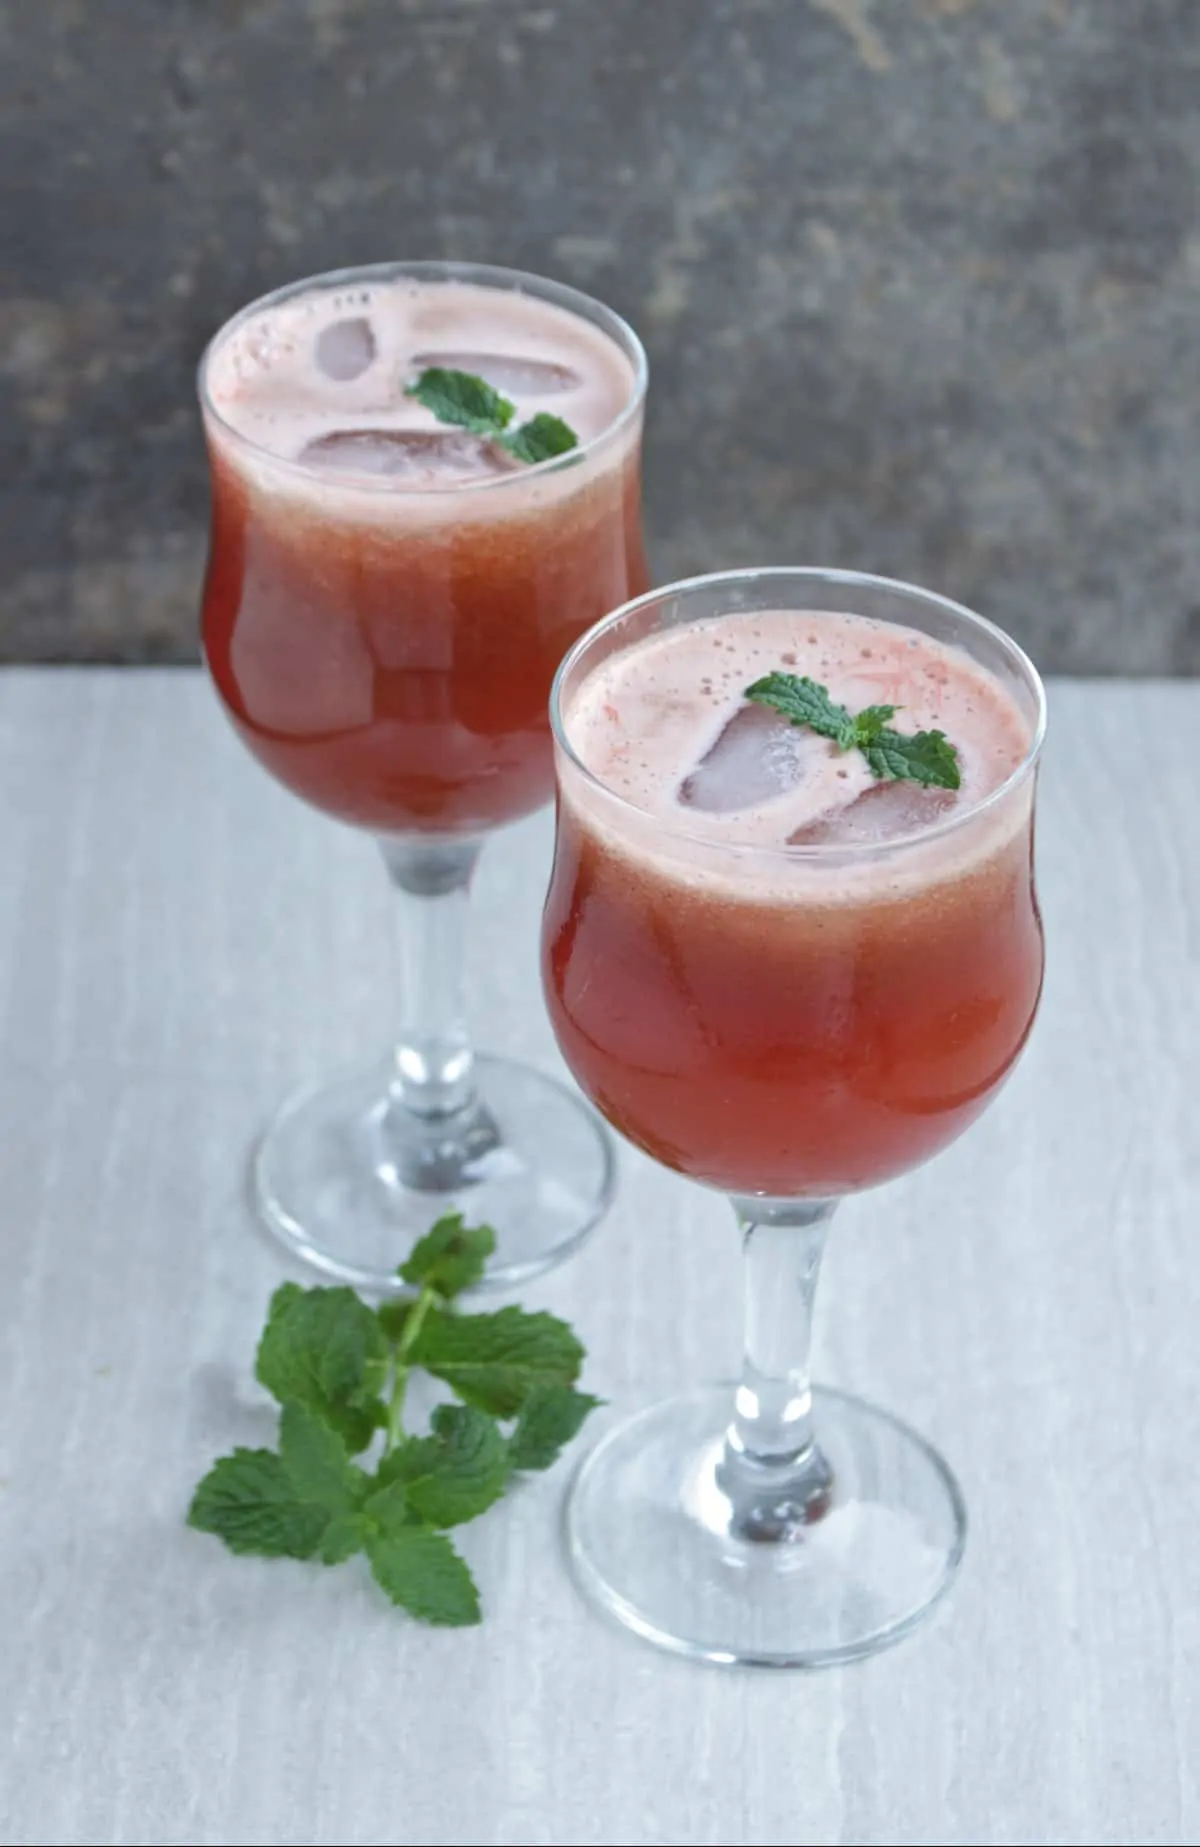 Watermelon juice with mint as garnish in 2 glasses.